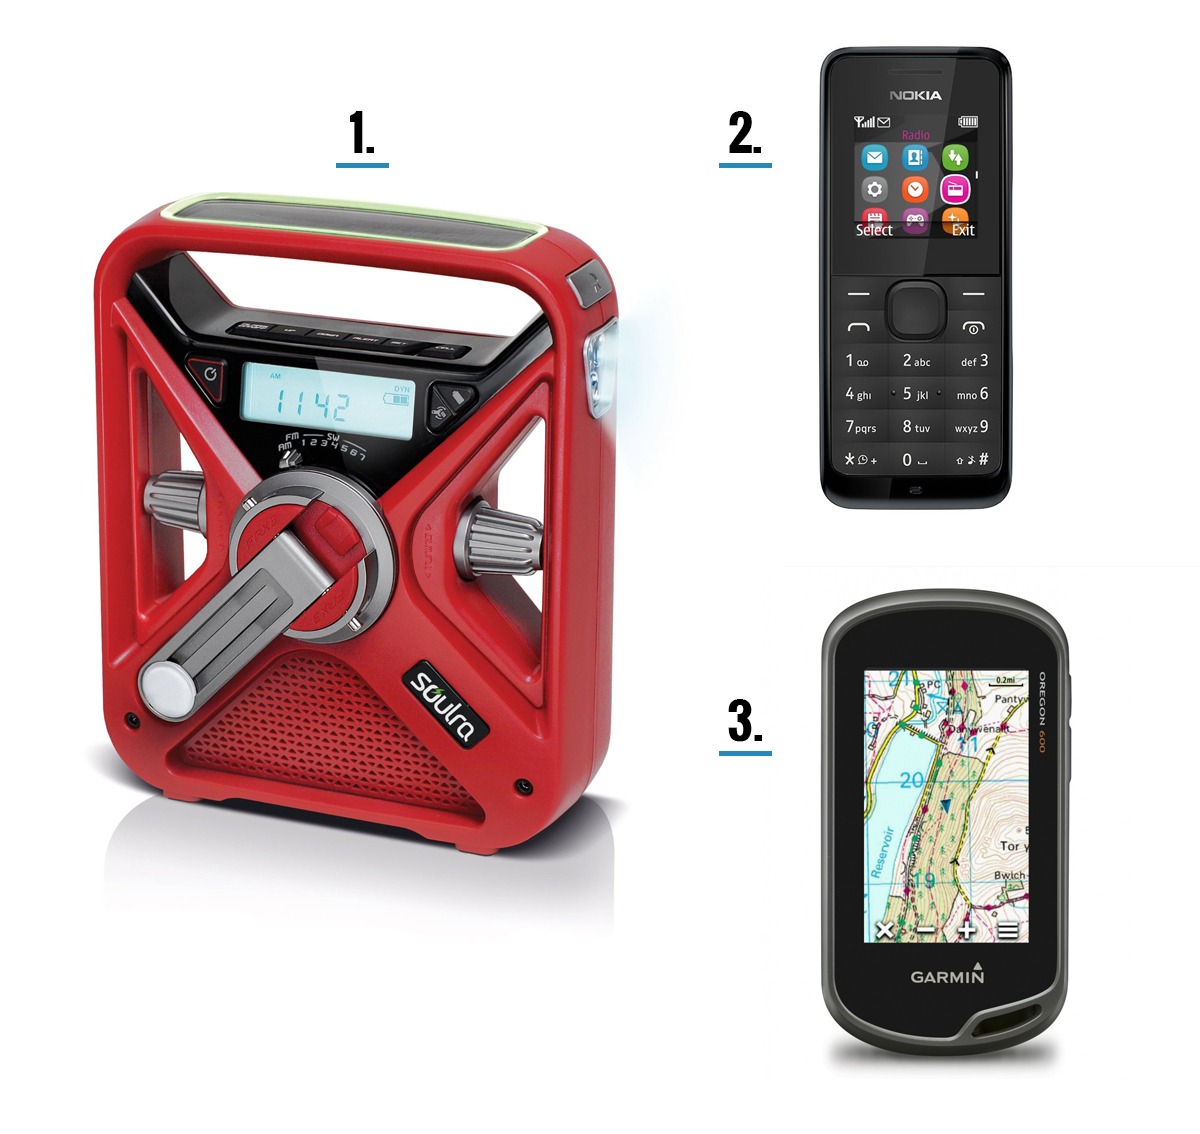 Bug out bag essentials - communication devices